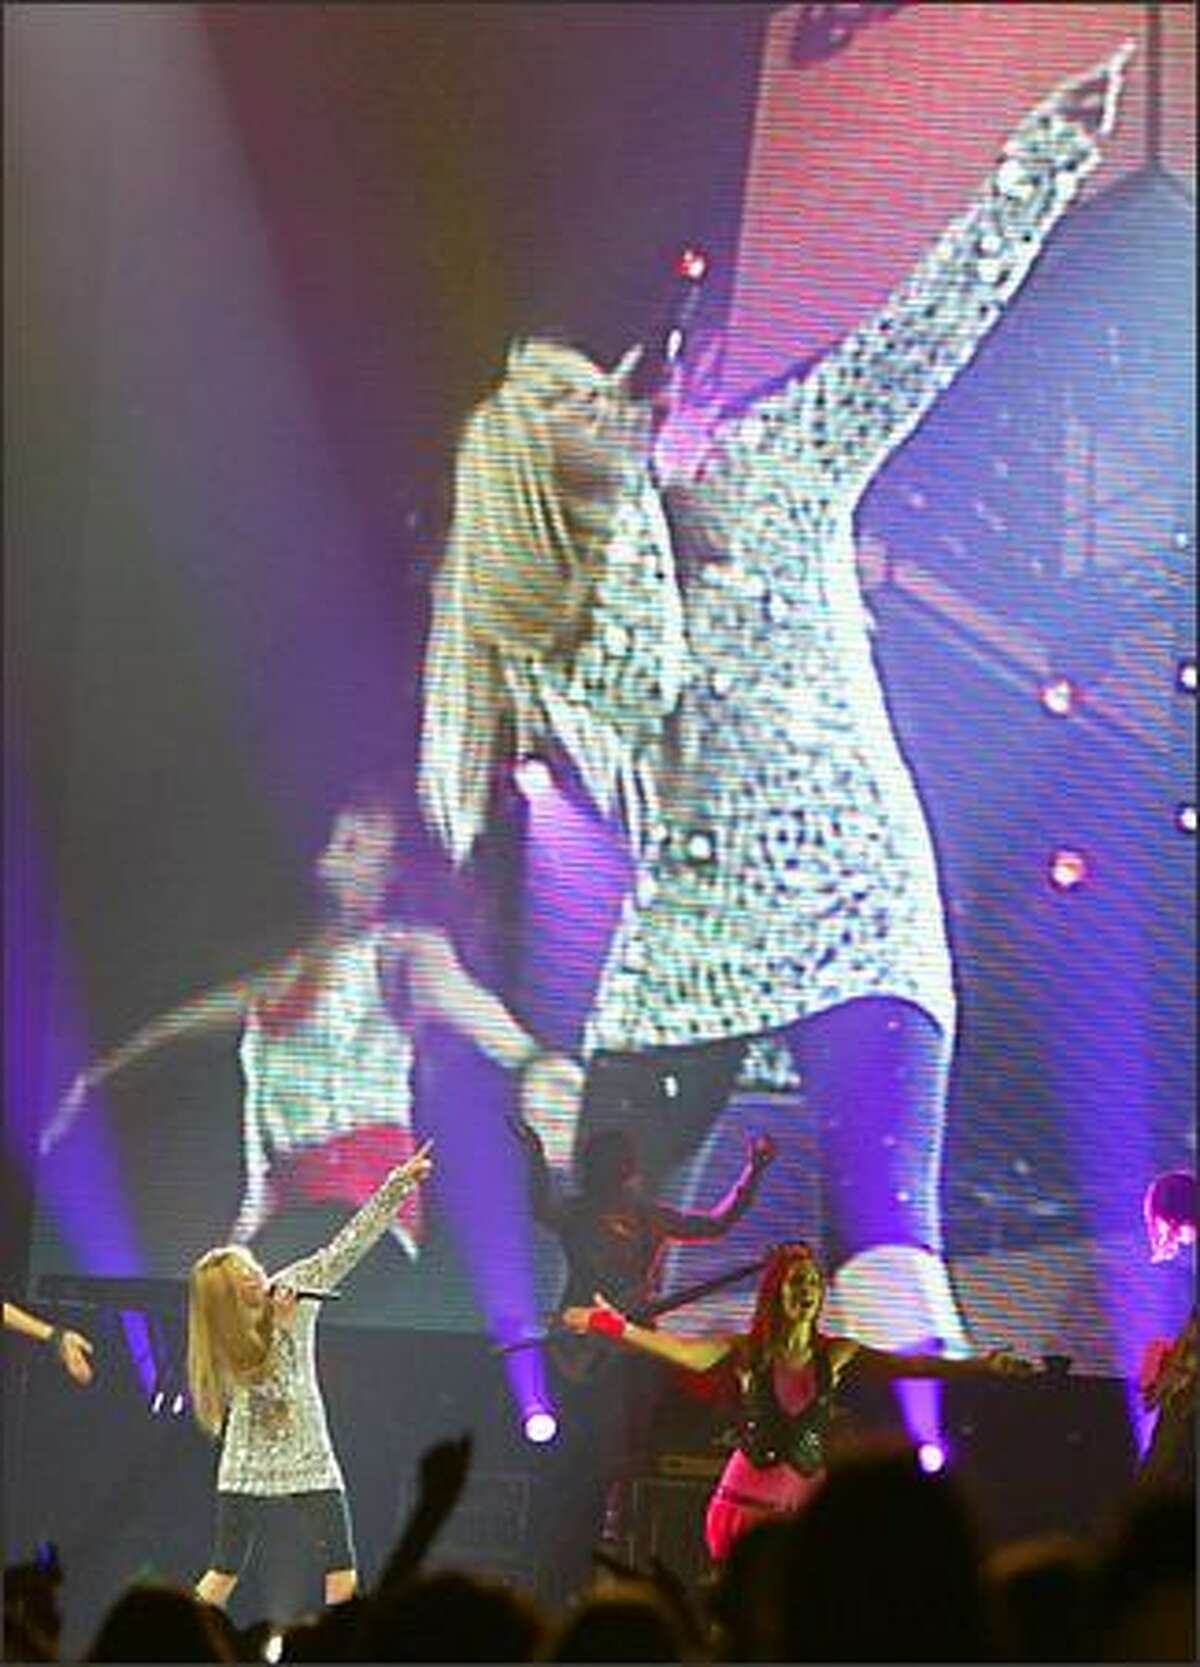 Miley Cyrus aka Hannah Montana performs during her concert at Key Arena.